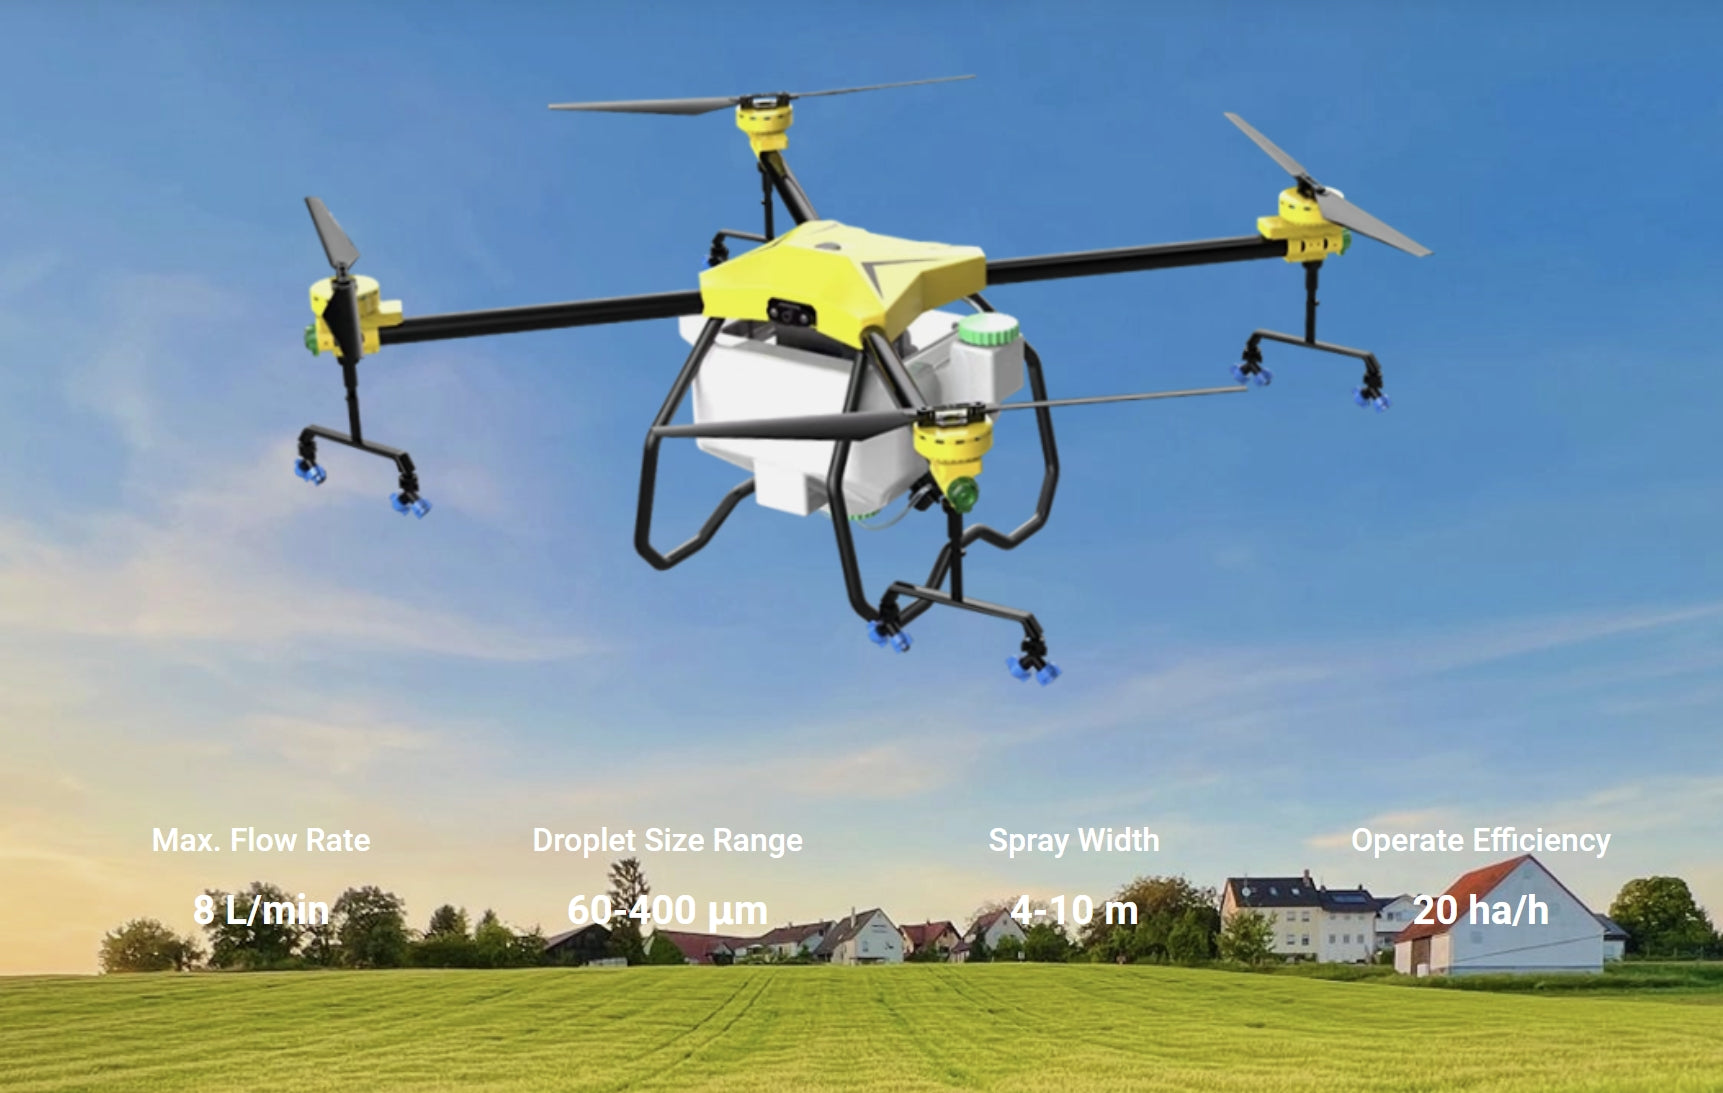 H60-4 Agricultural Drone, Max Flow Rate Droplet Size Range Spray Width Operate Efficiency 8 Ll